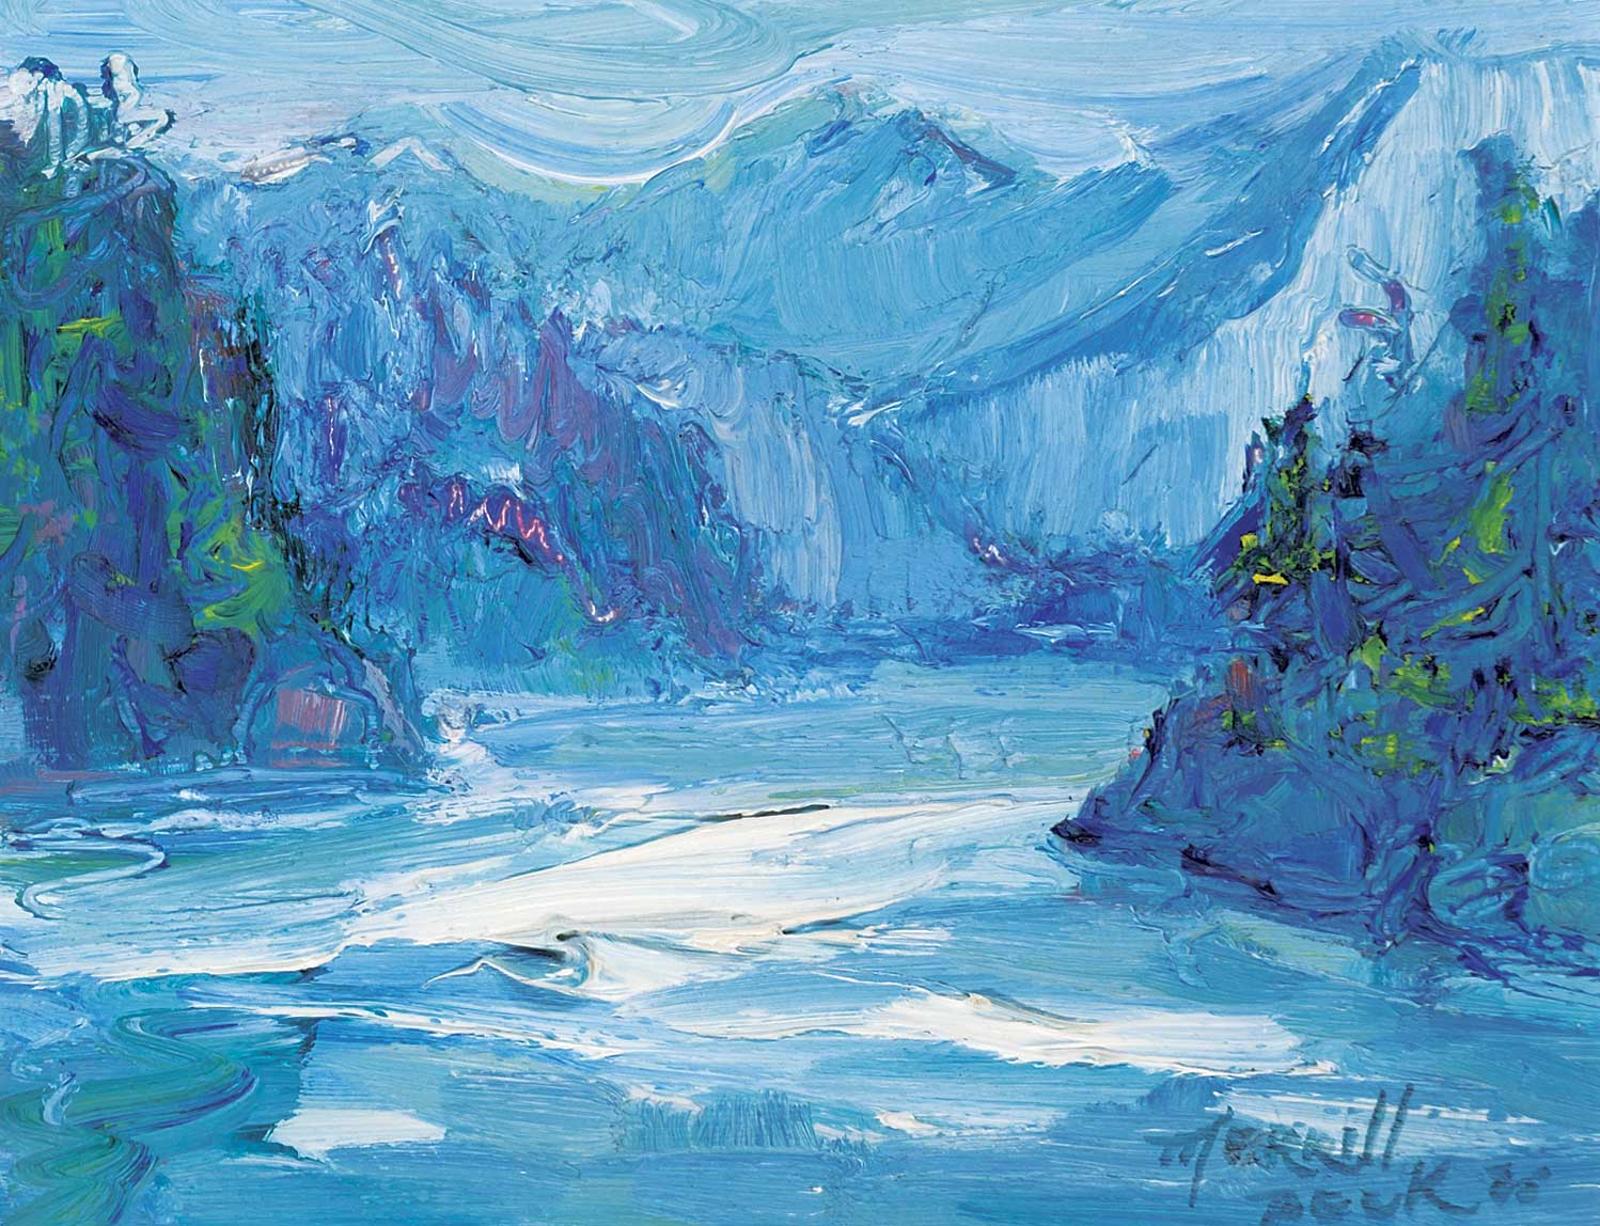 Merrill Peck - Untitled - Rocky Mountain River